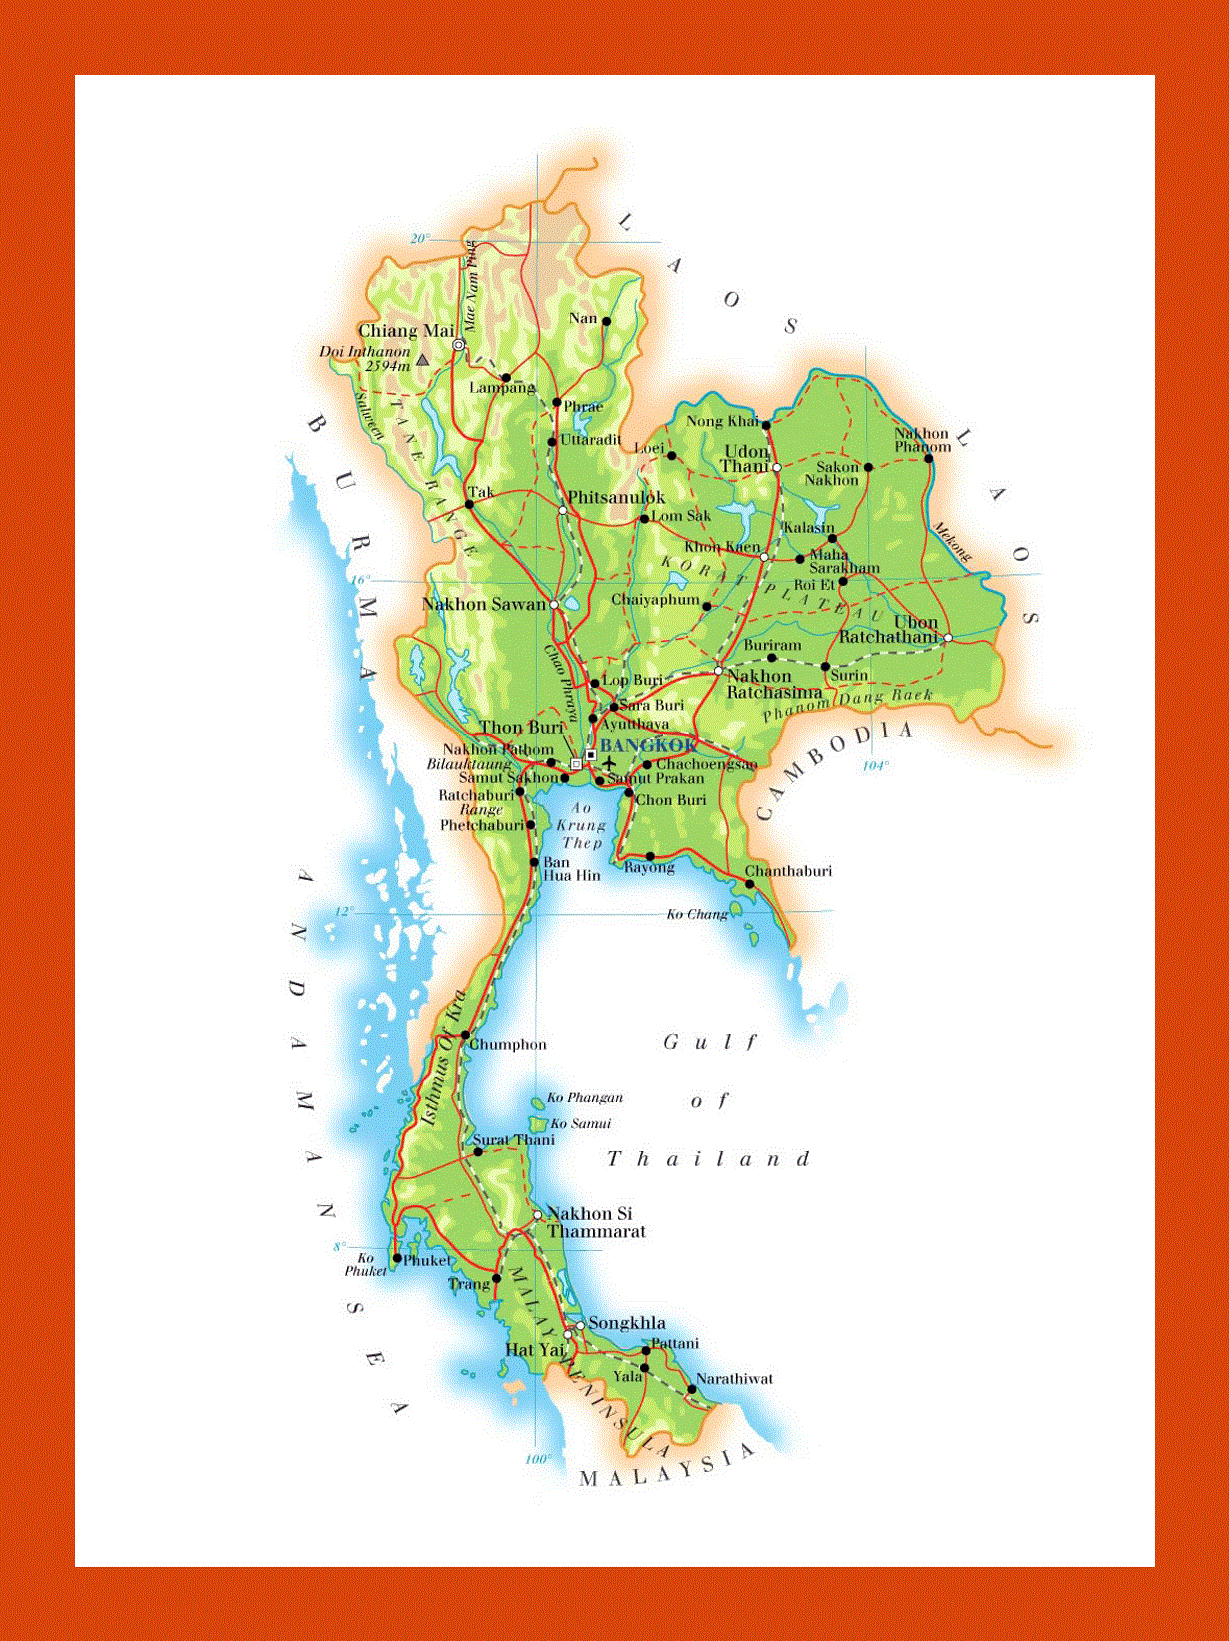 Elevation map of Thailand